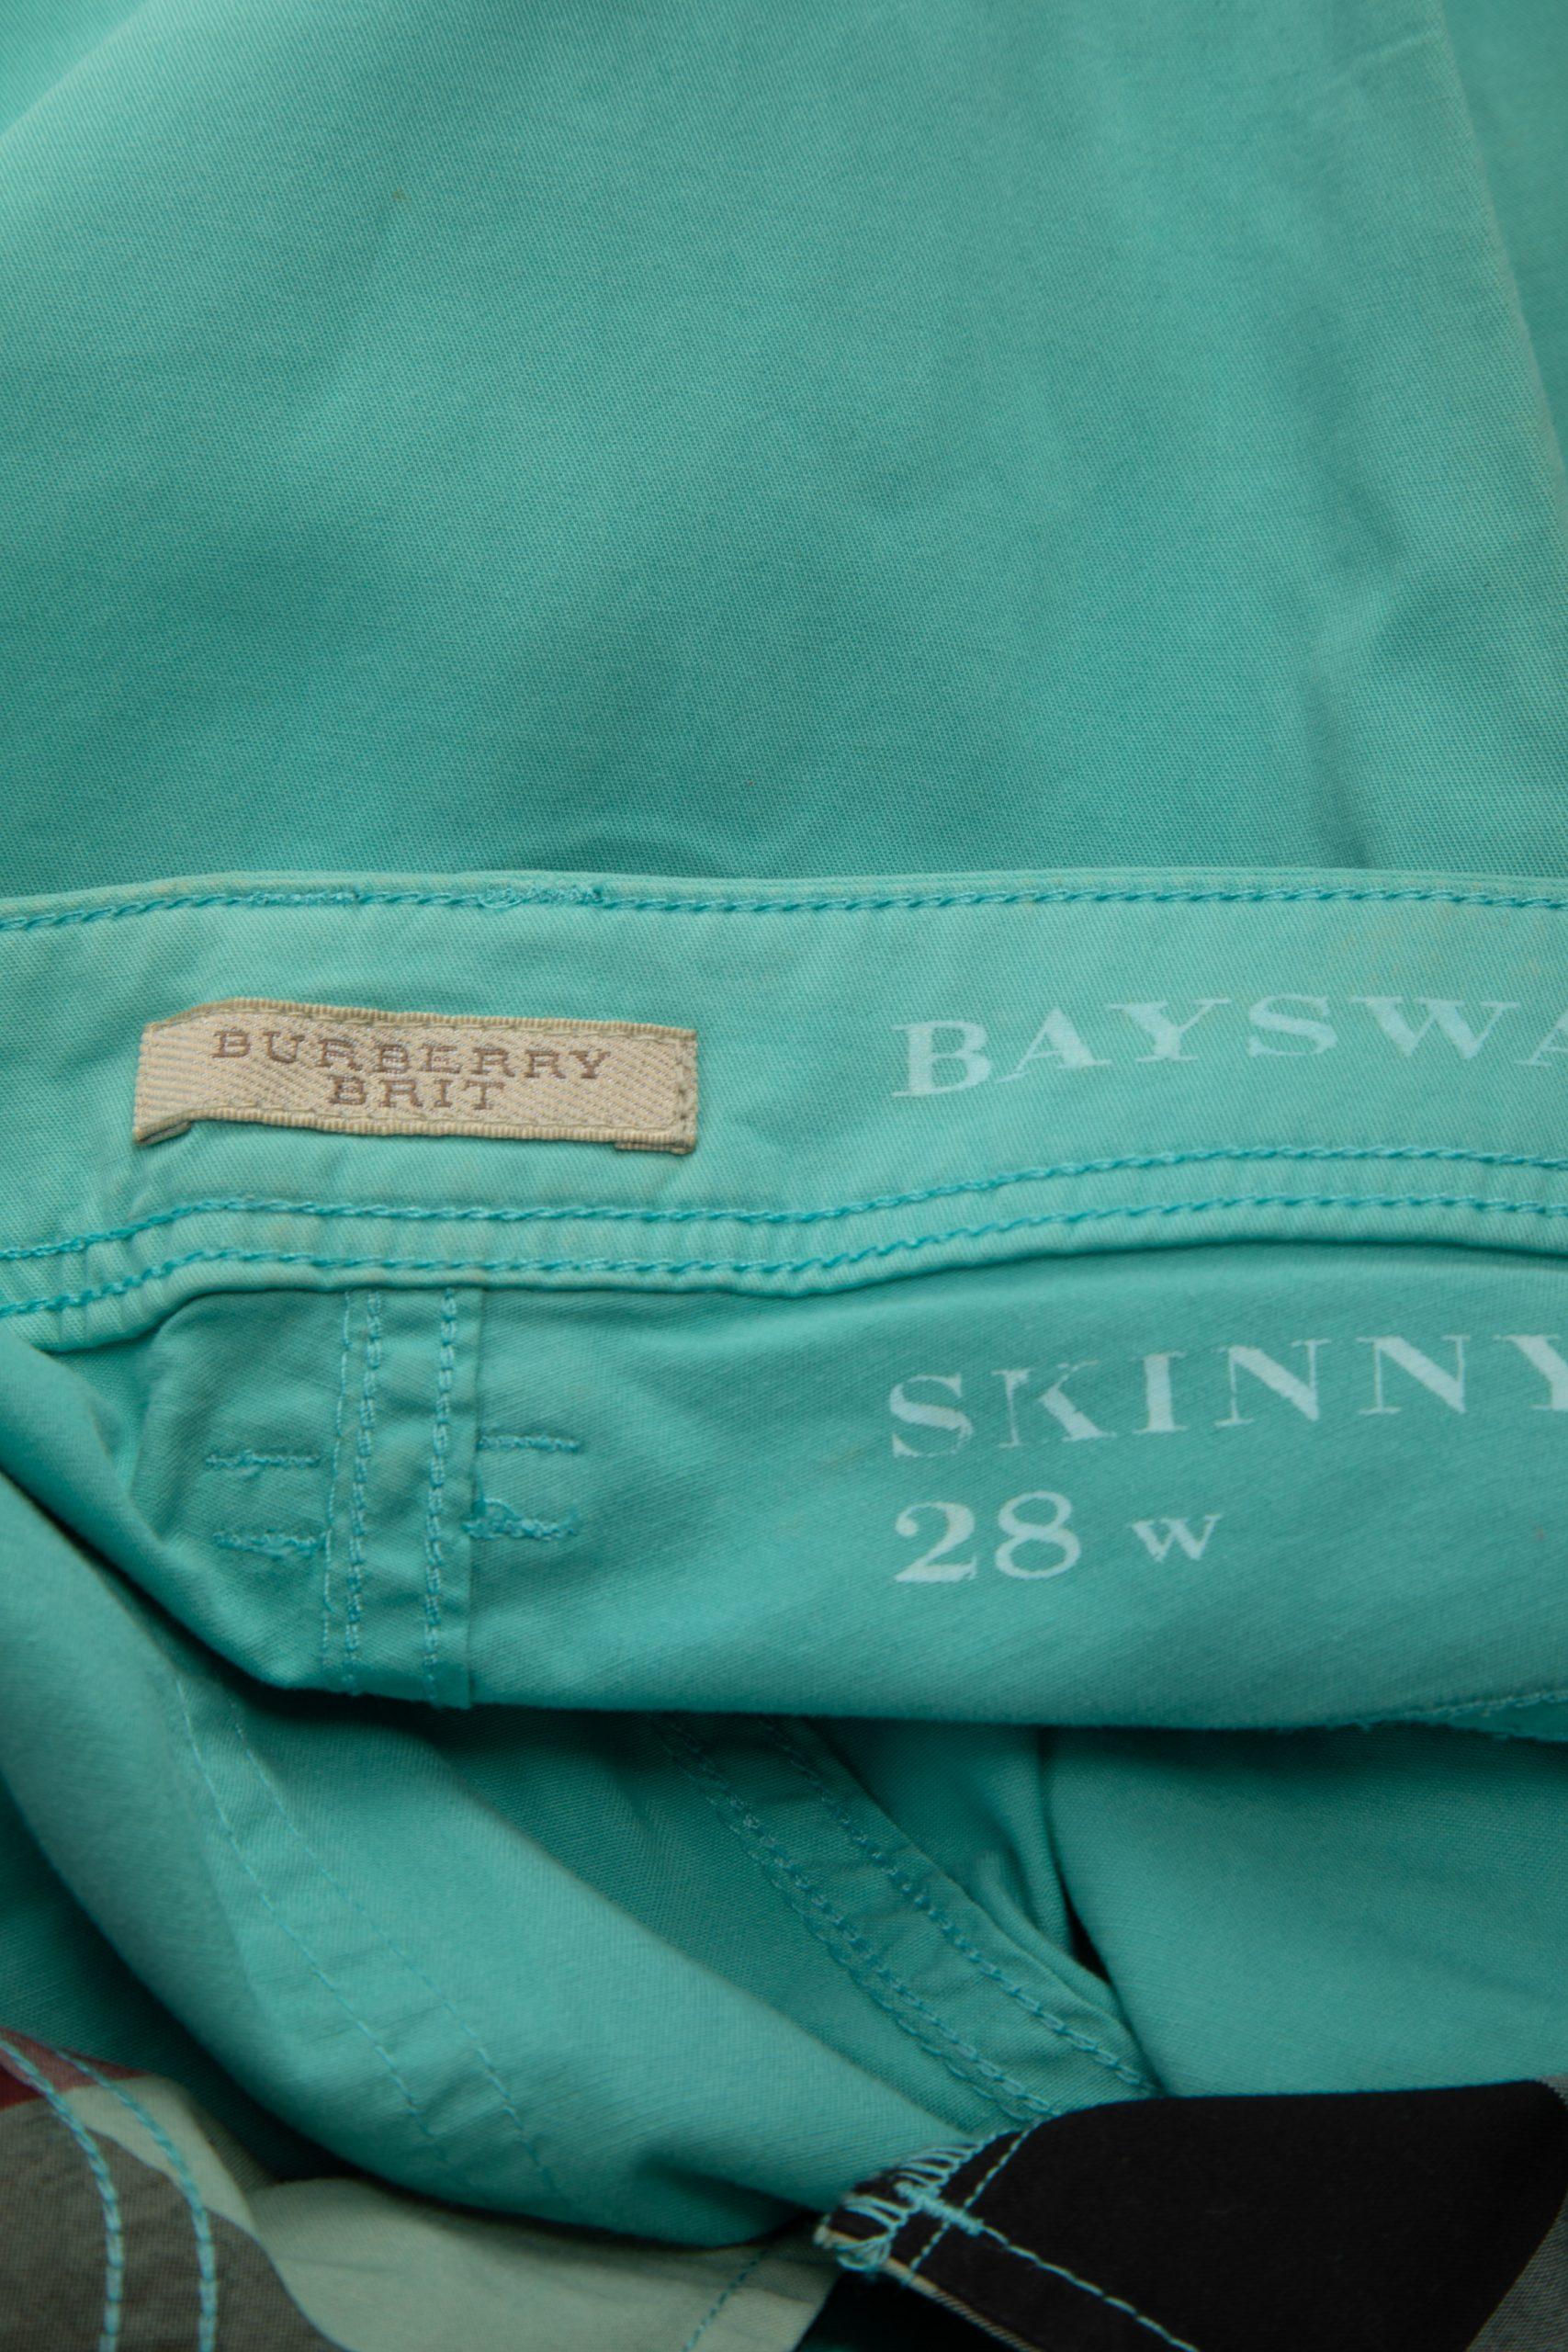 Burberry Women's Burberry Brit Turquoise Bayswater Skinny Ankle Zip Trousers 2